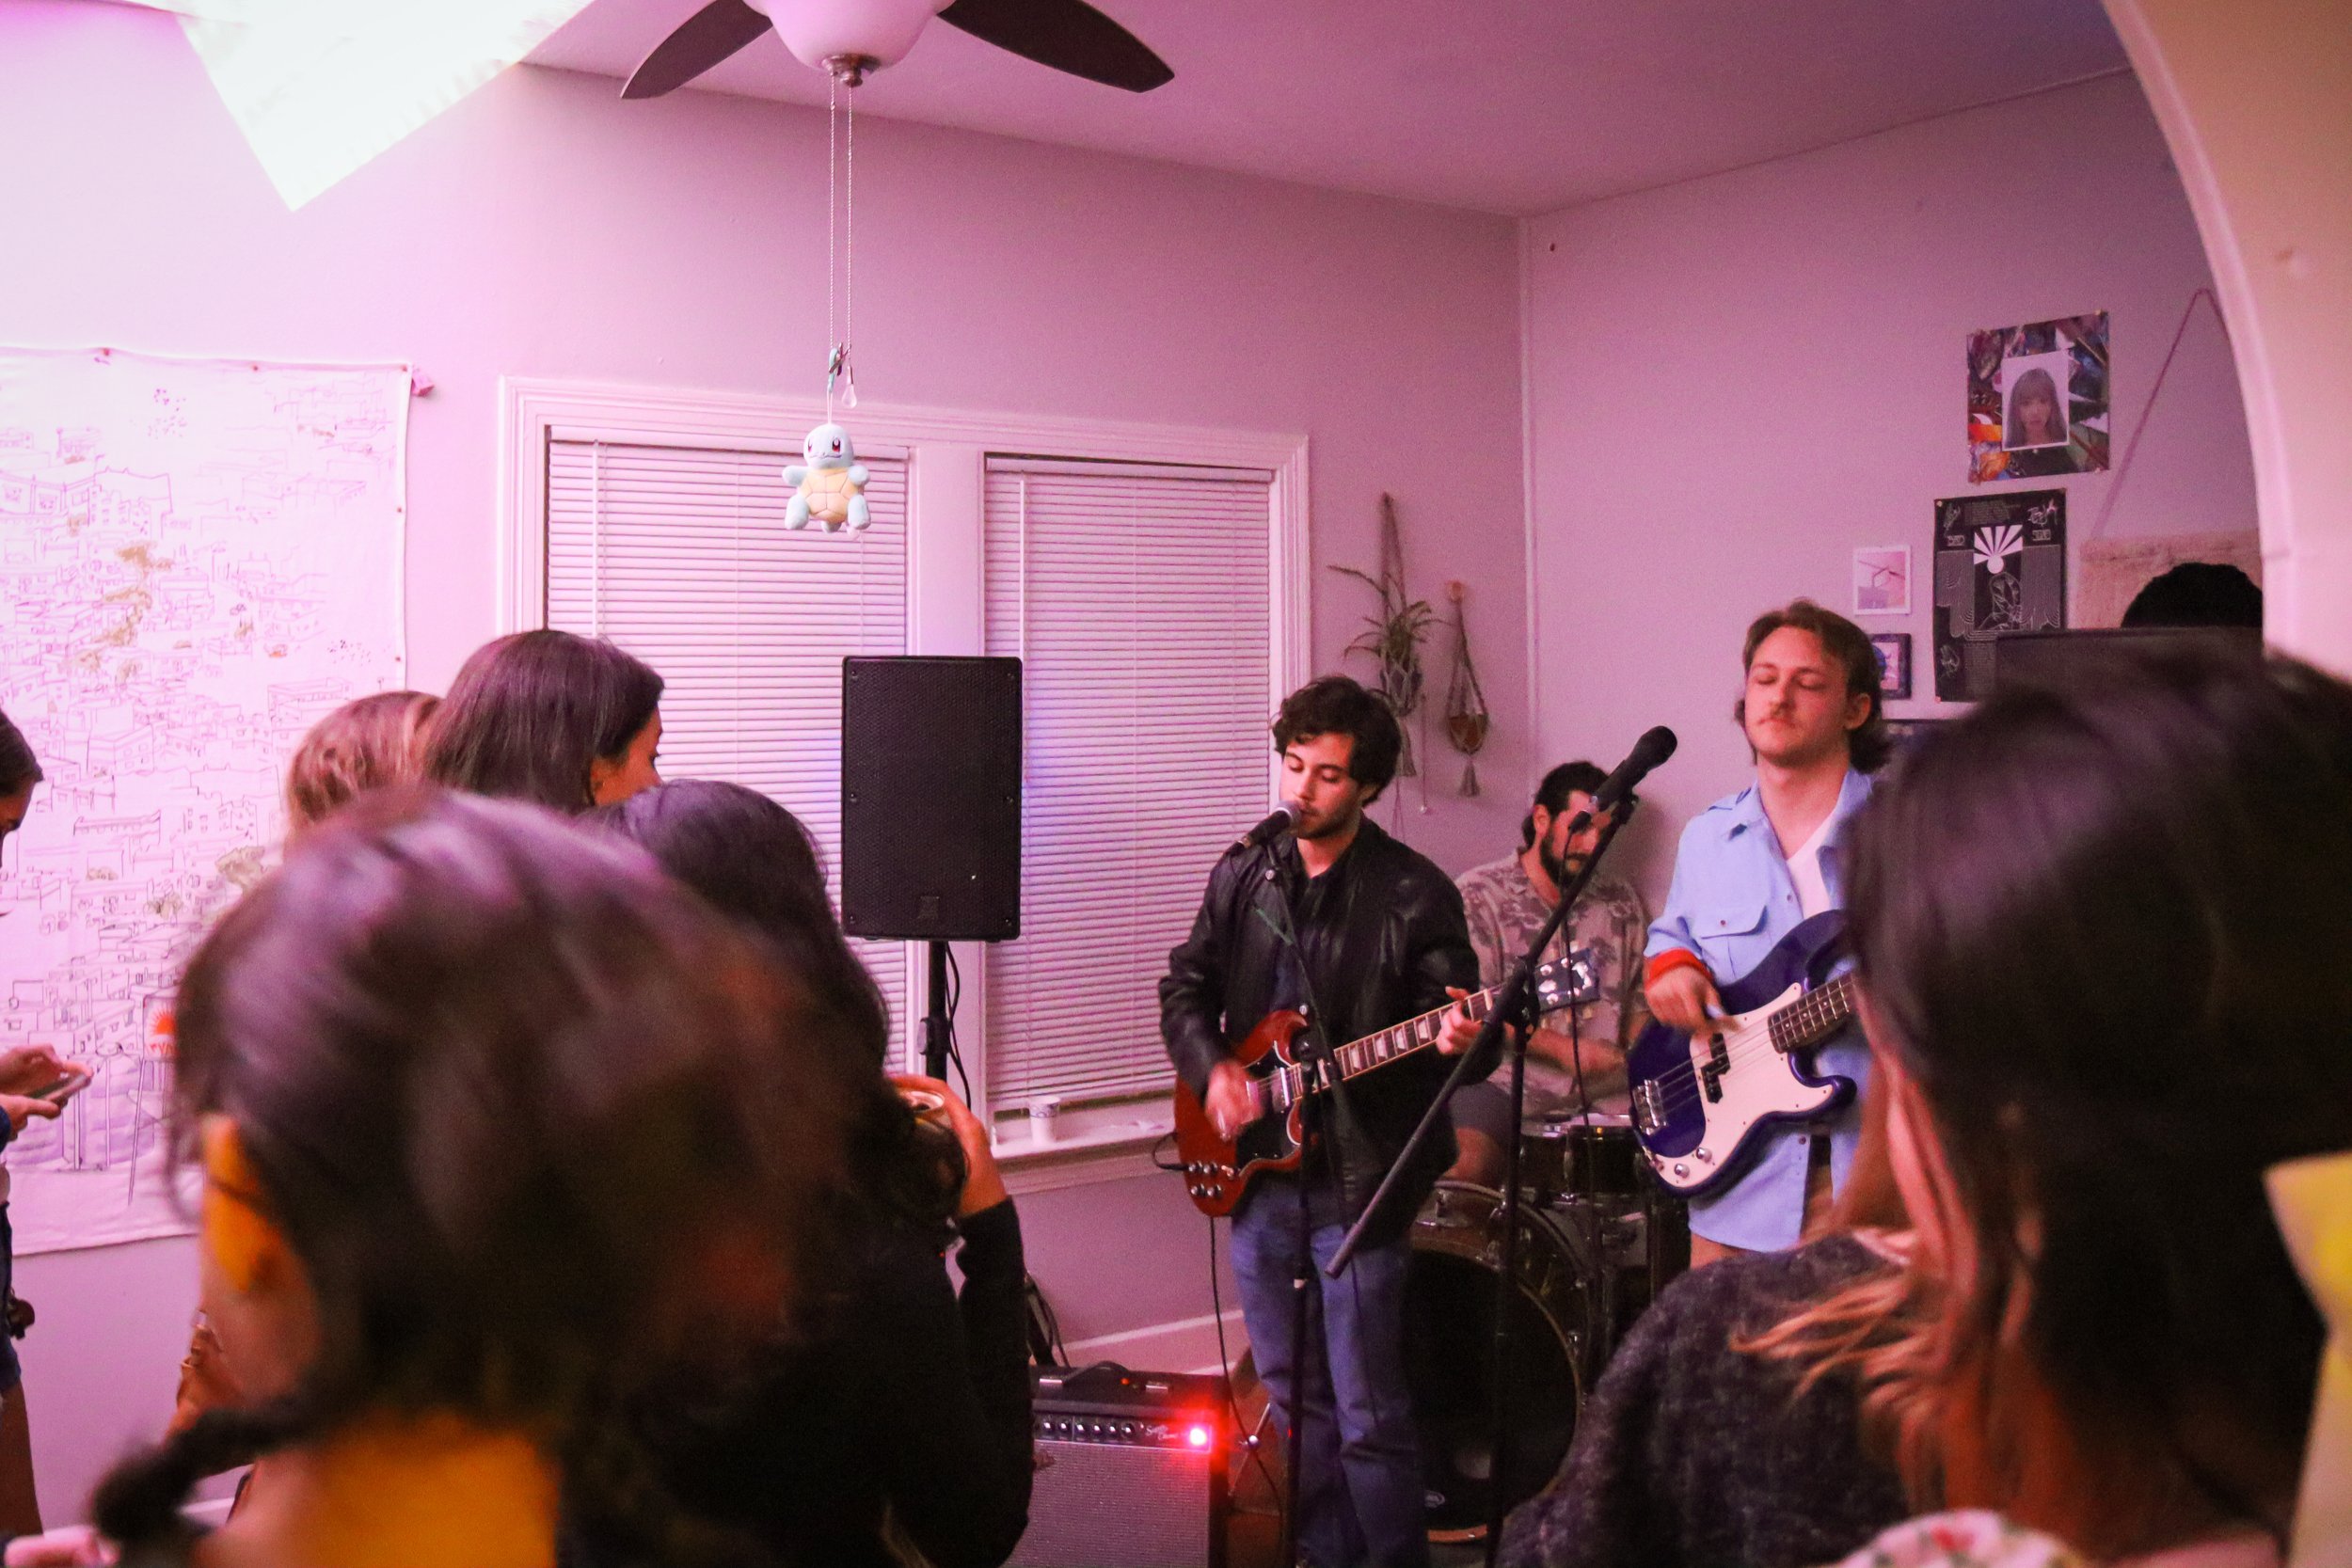  Rental Space performs its opening set at the Afterglow House Show.  Photo by Natalie Anspach  